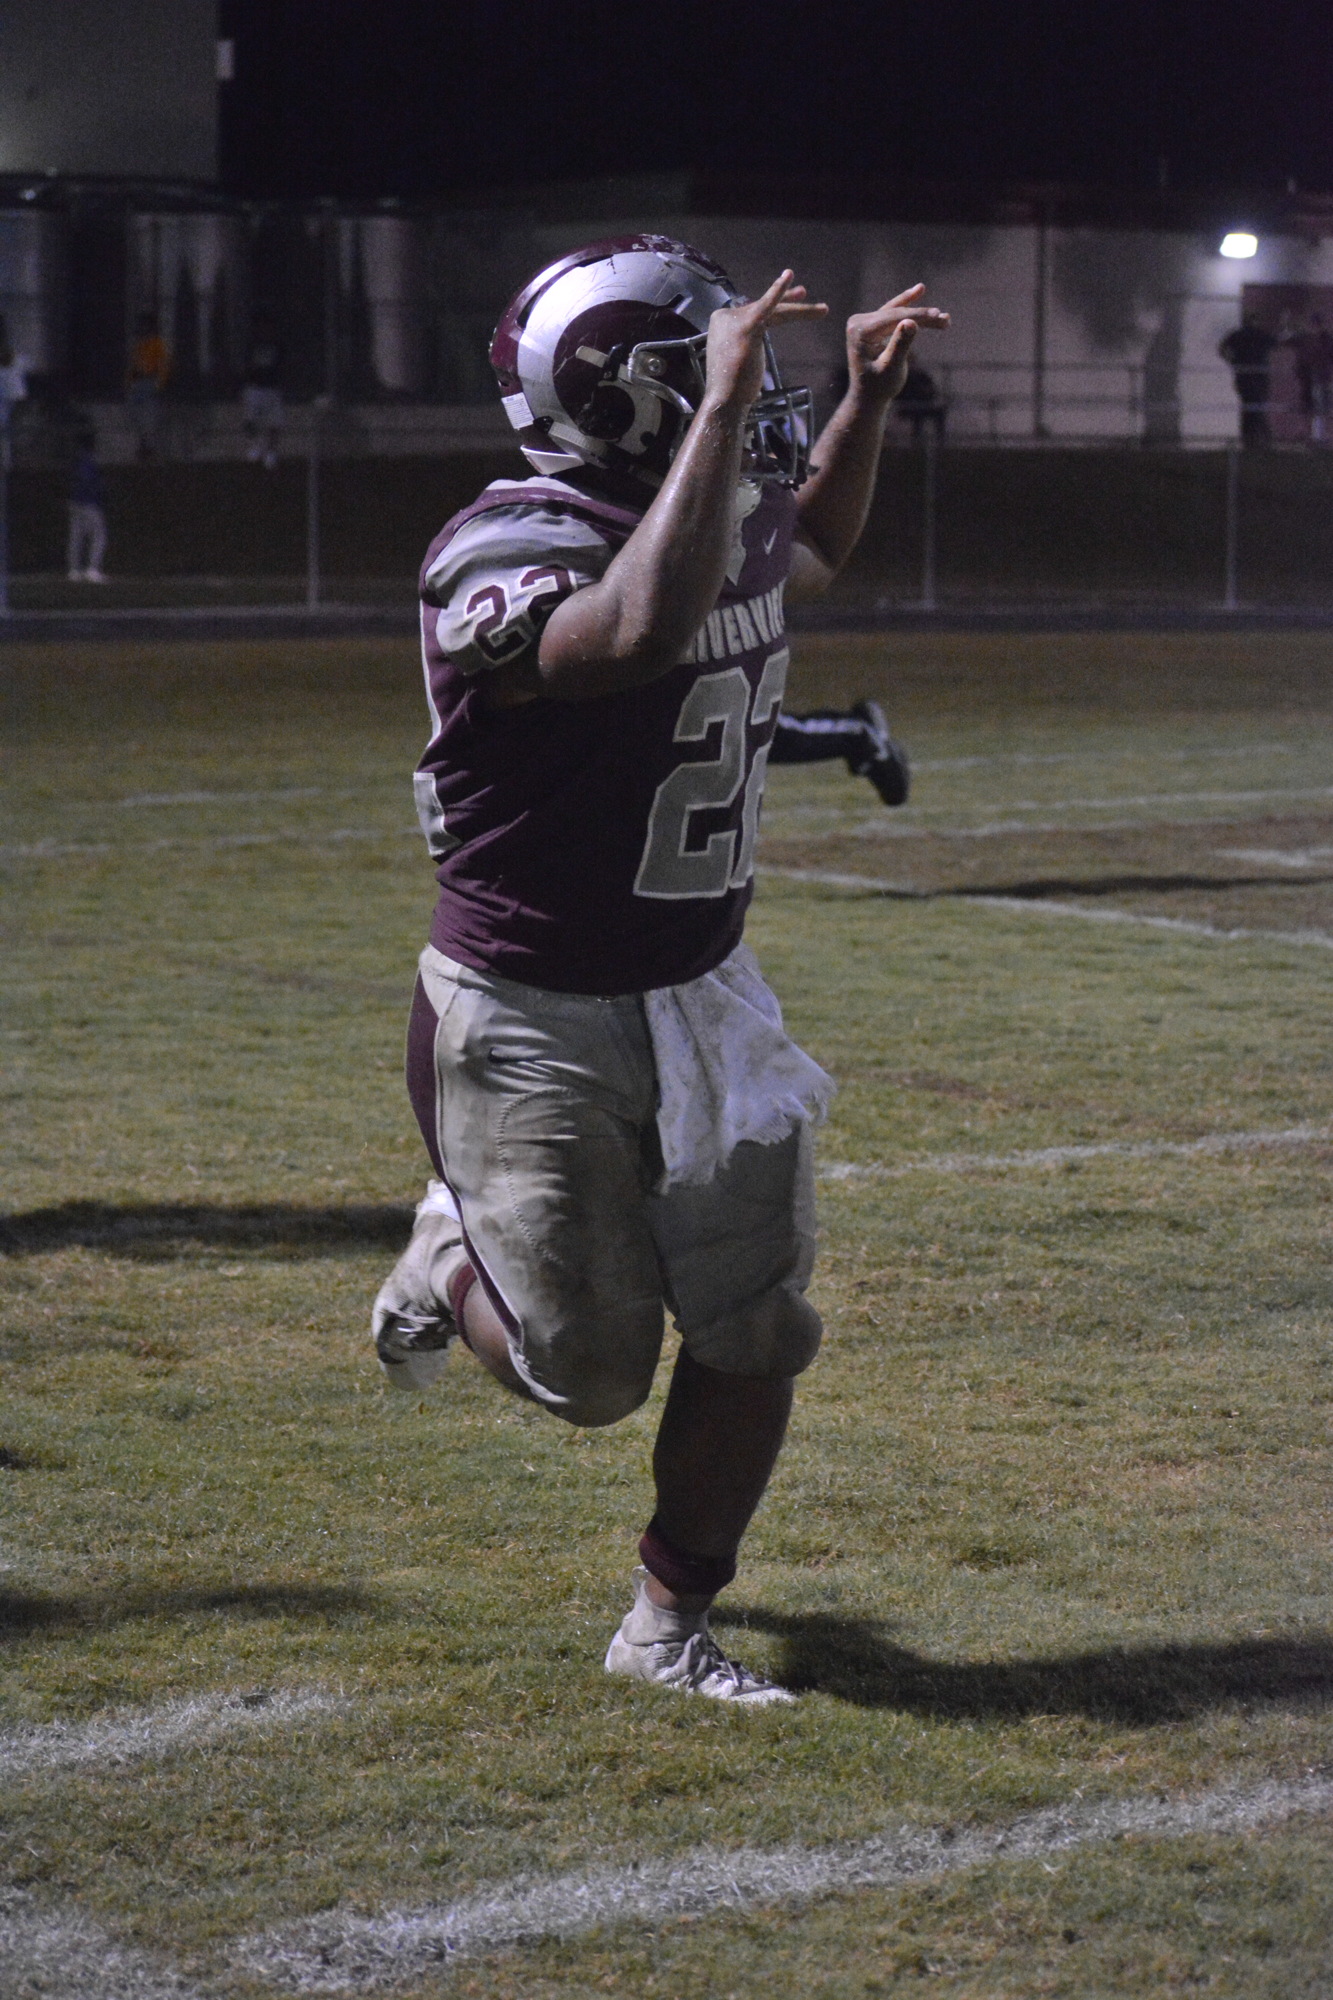 Ali Boyce waves goodbye to the Panthers after scoring a touchdown.